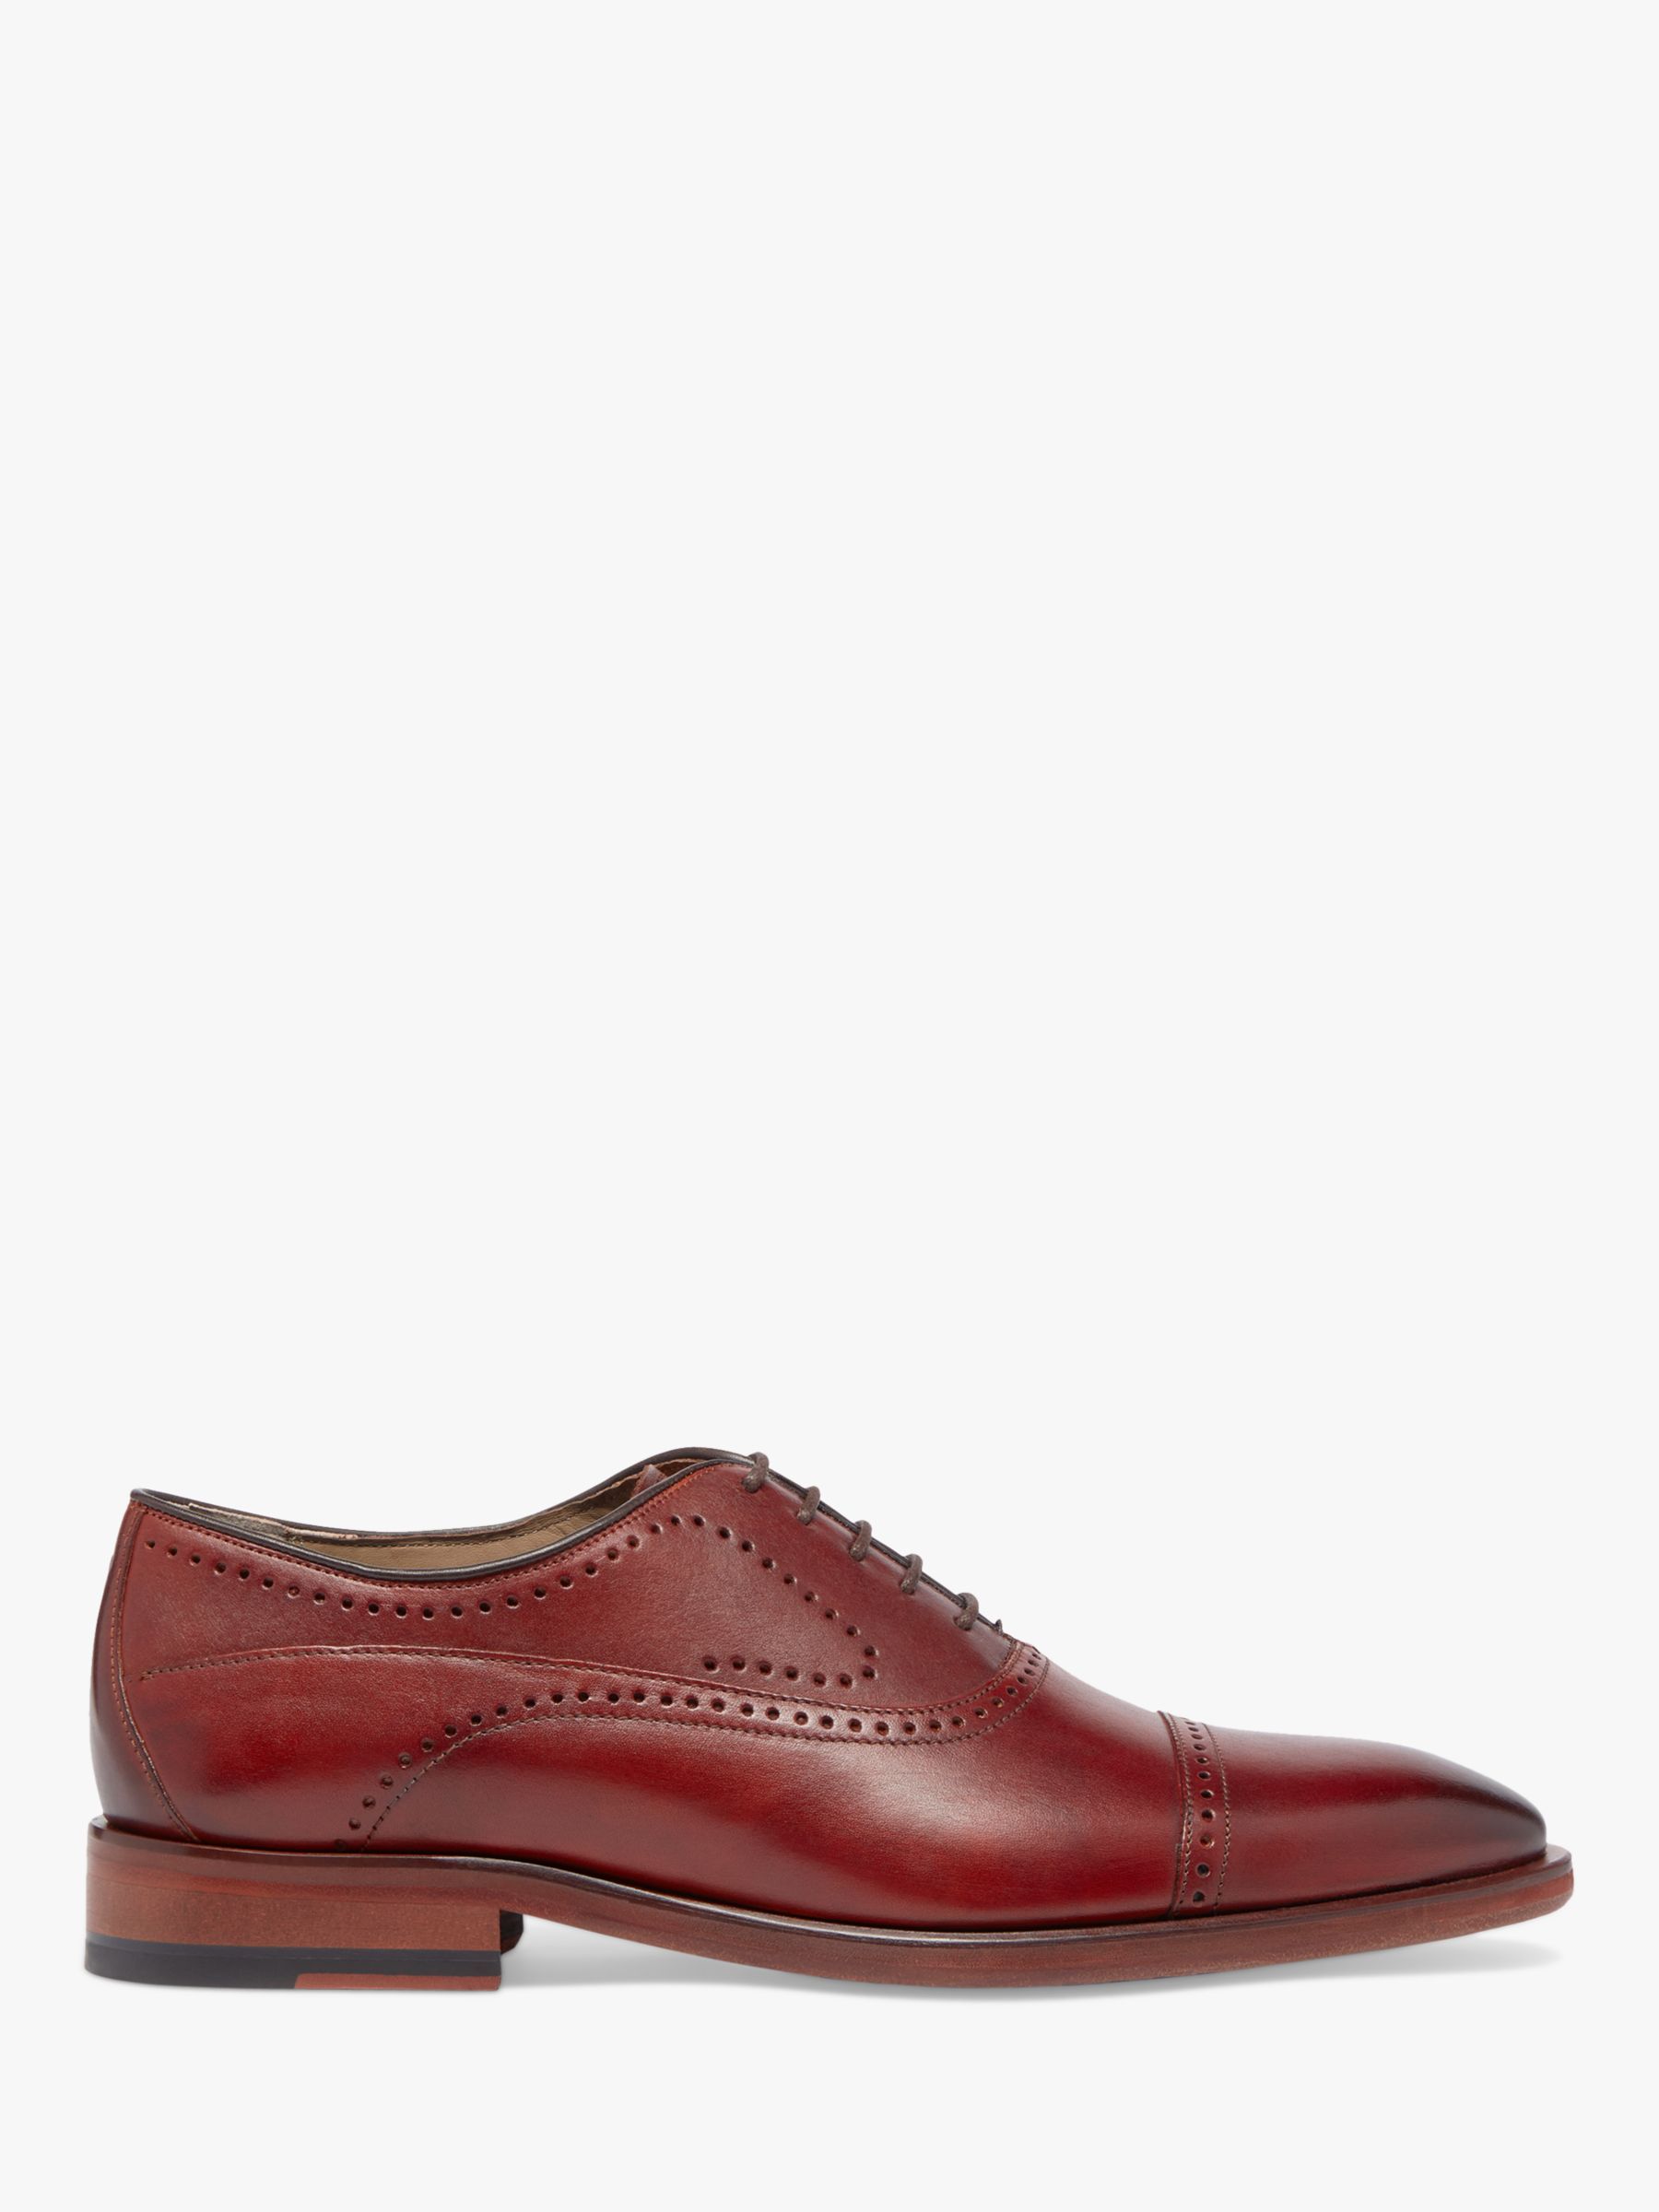 Oliver Sweeney Mallory Oxford Shoes, Tan, 7